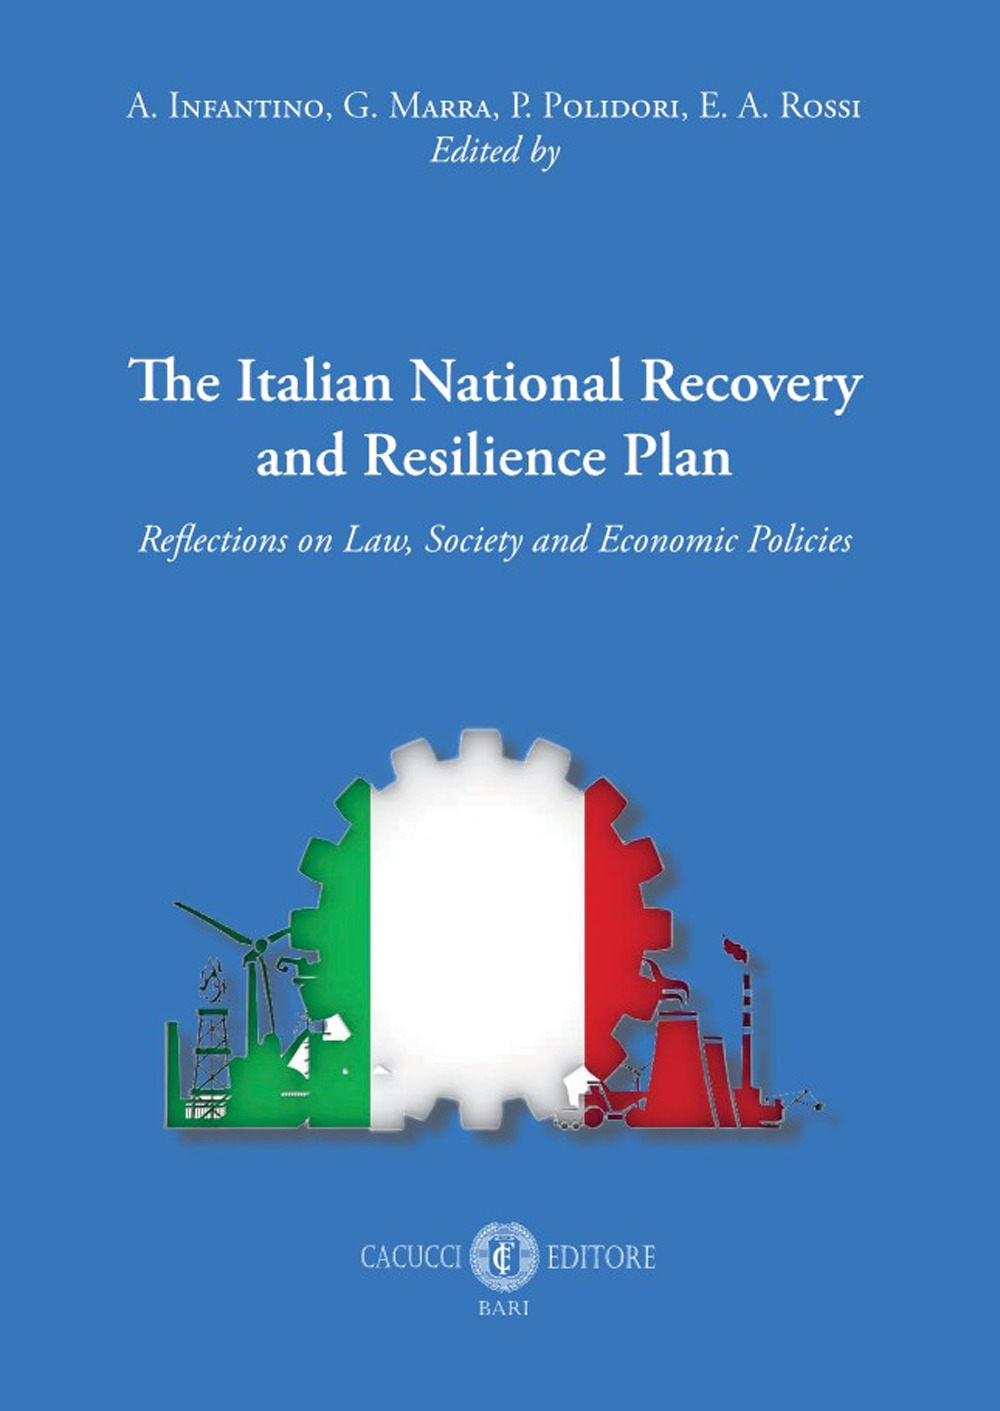 The Italian national recovery and resilience plan. Reflections on law, society and economic policies